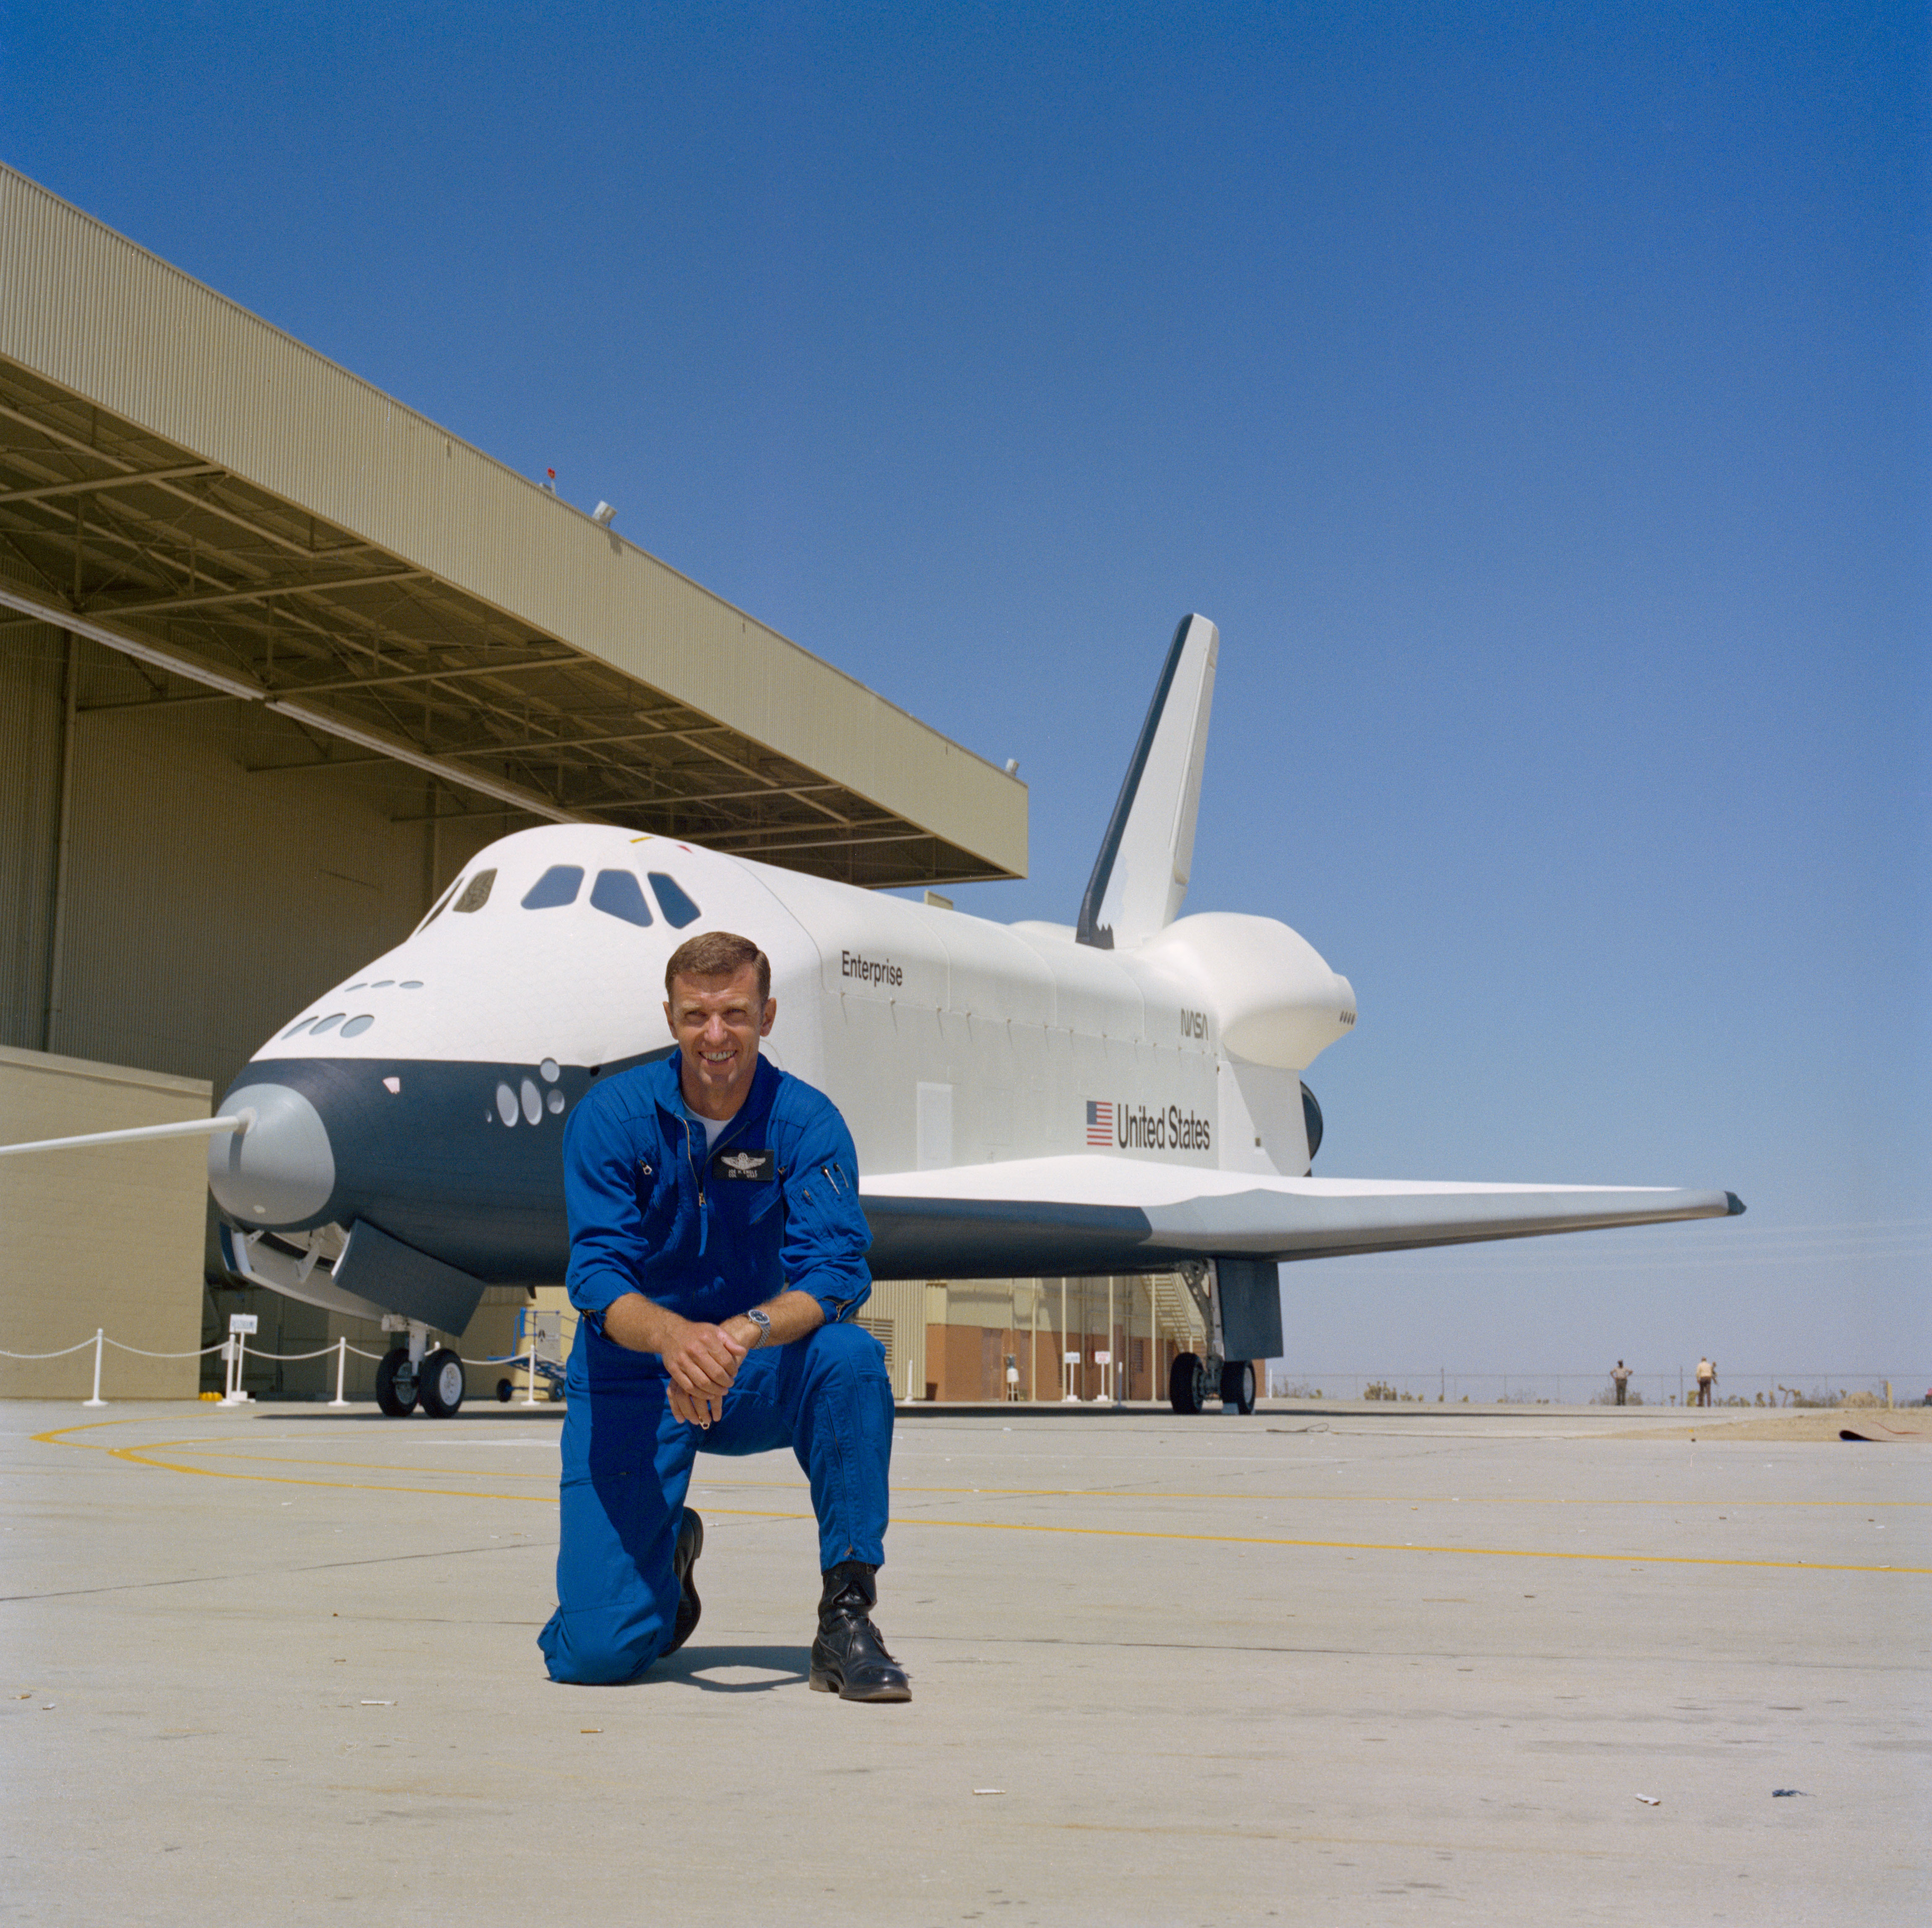 NASA astronaut Engle poses in front of space shuttle Enterprise during its first rollout in 1976